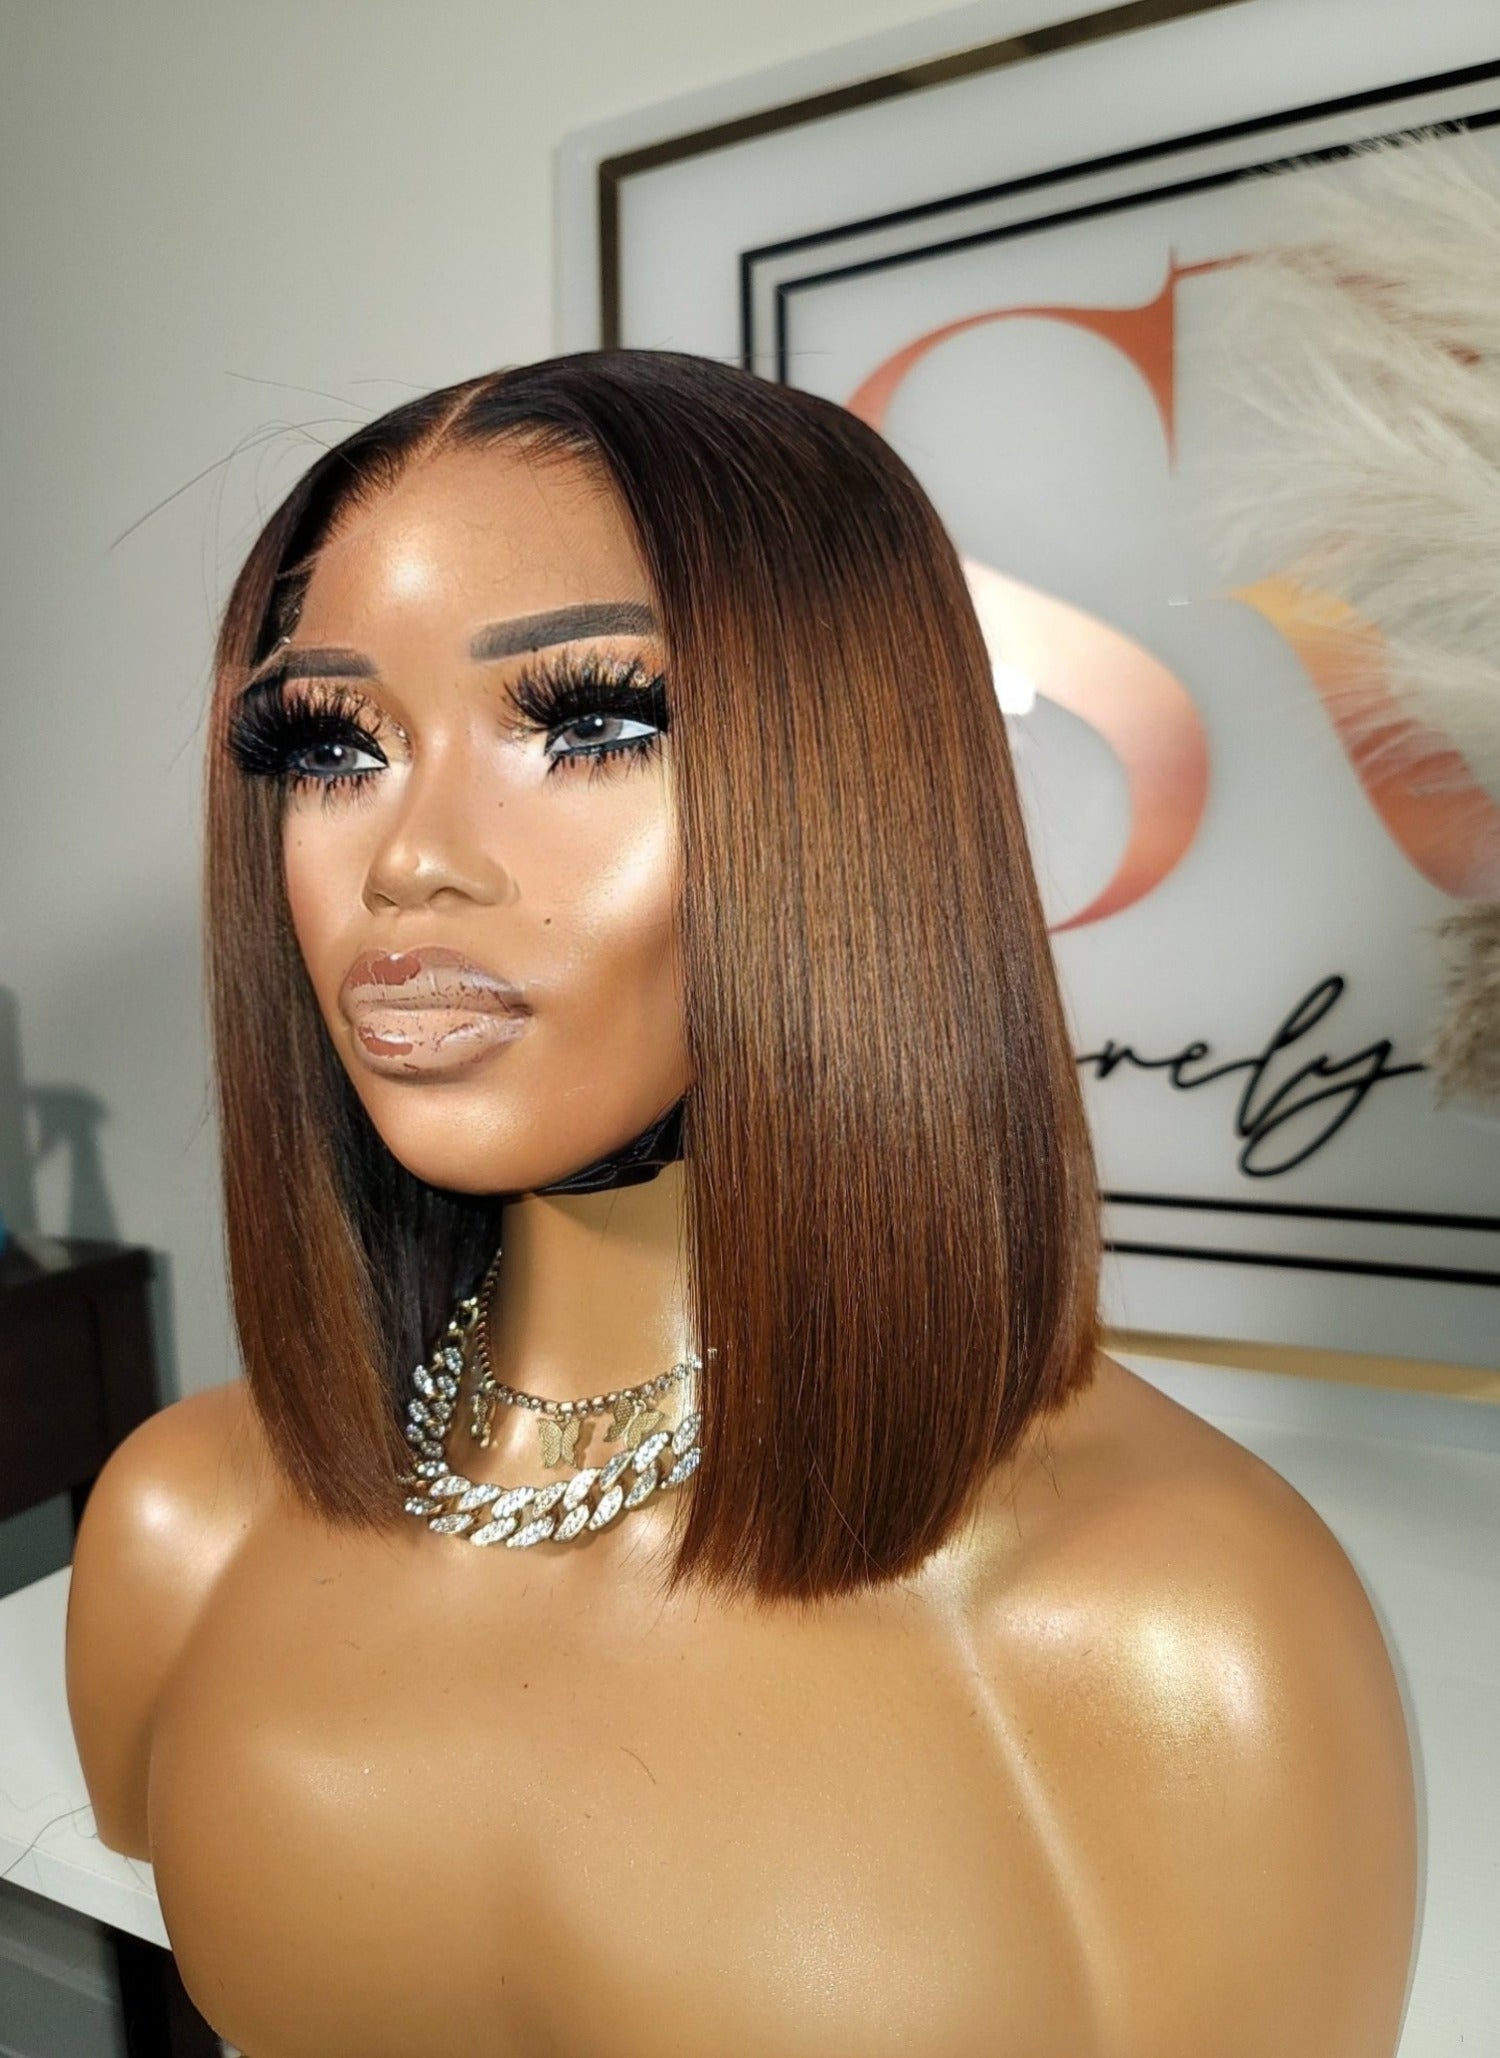 Custom Glueless Wig - Explore our collection of high-quality glueless wigs for a seamless and comfortable hair experience. Ready-to-wear, custom colored, and styled for effortless beauty. Perfect for busy lifestyles.